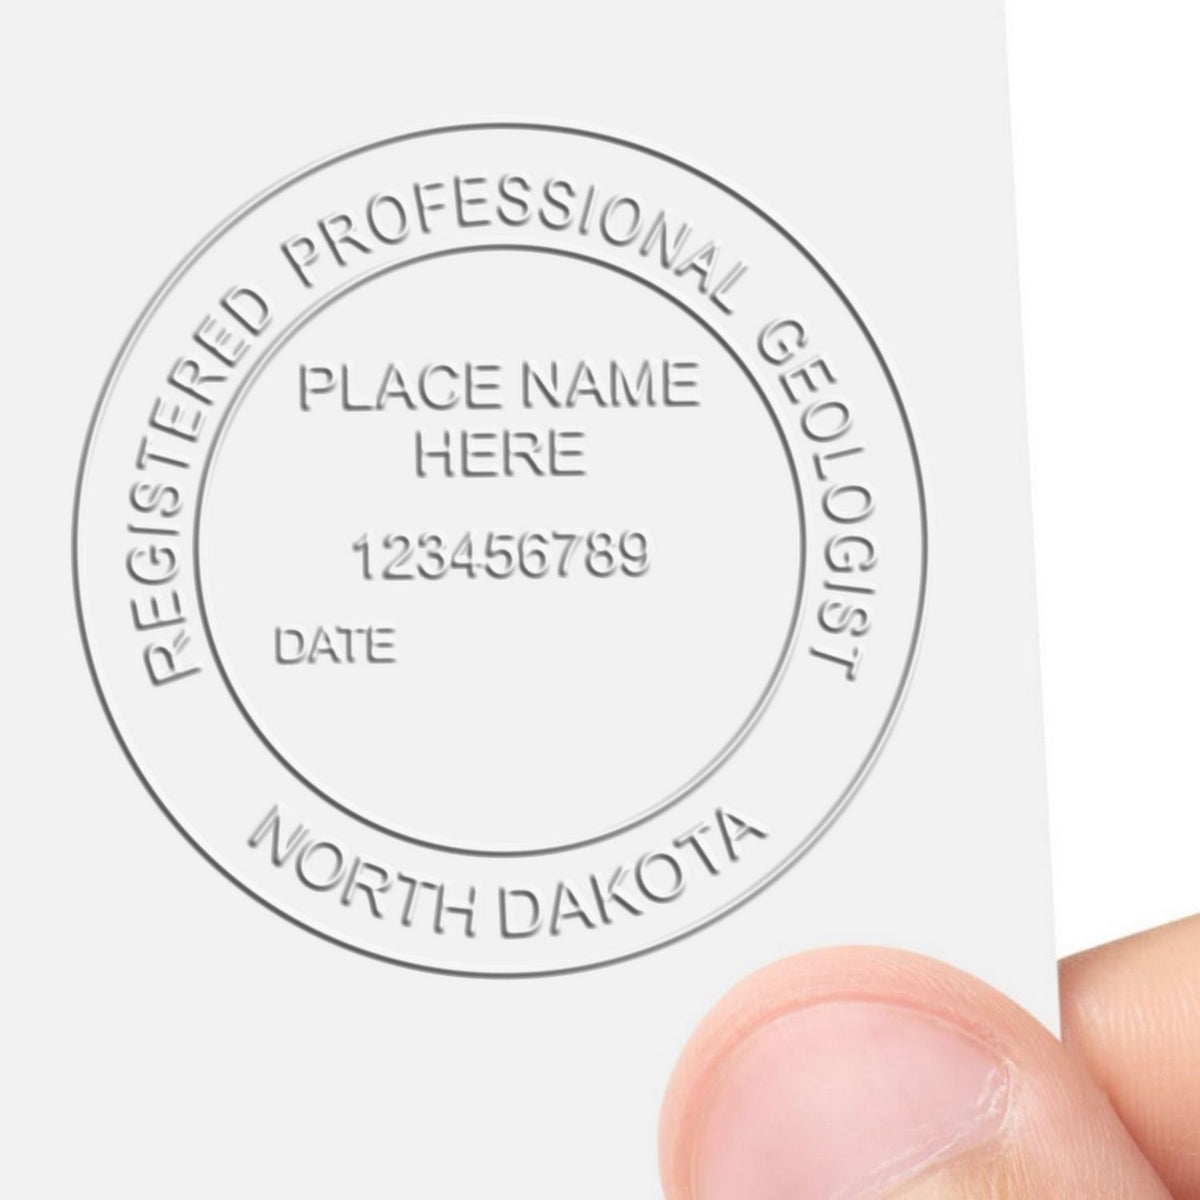 A lifestyle photo showing a stamped image of the Heavy Duty Cast Iron North Dakota Geologist Seal Embosser on a piece of paper